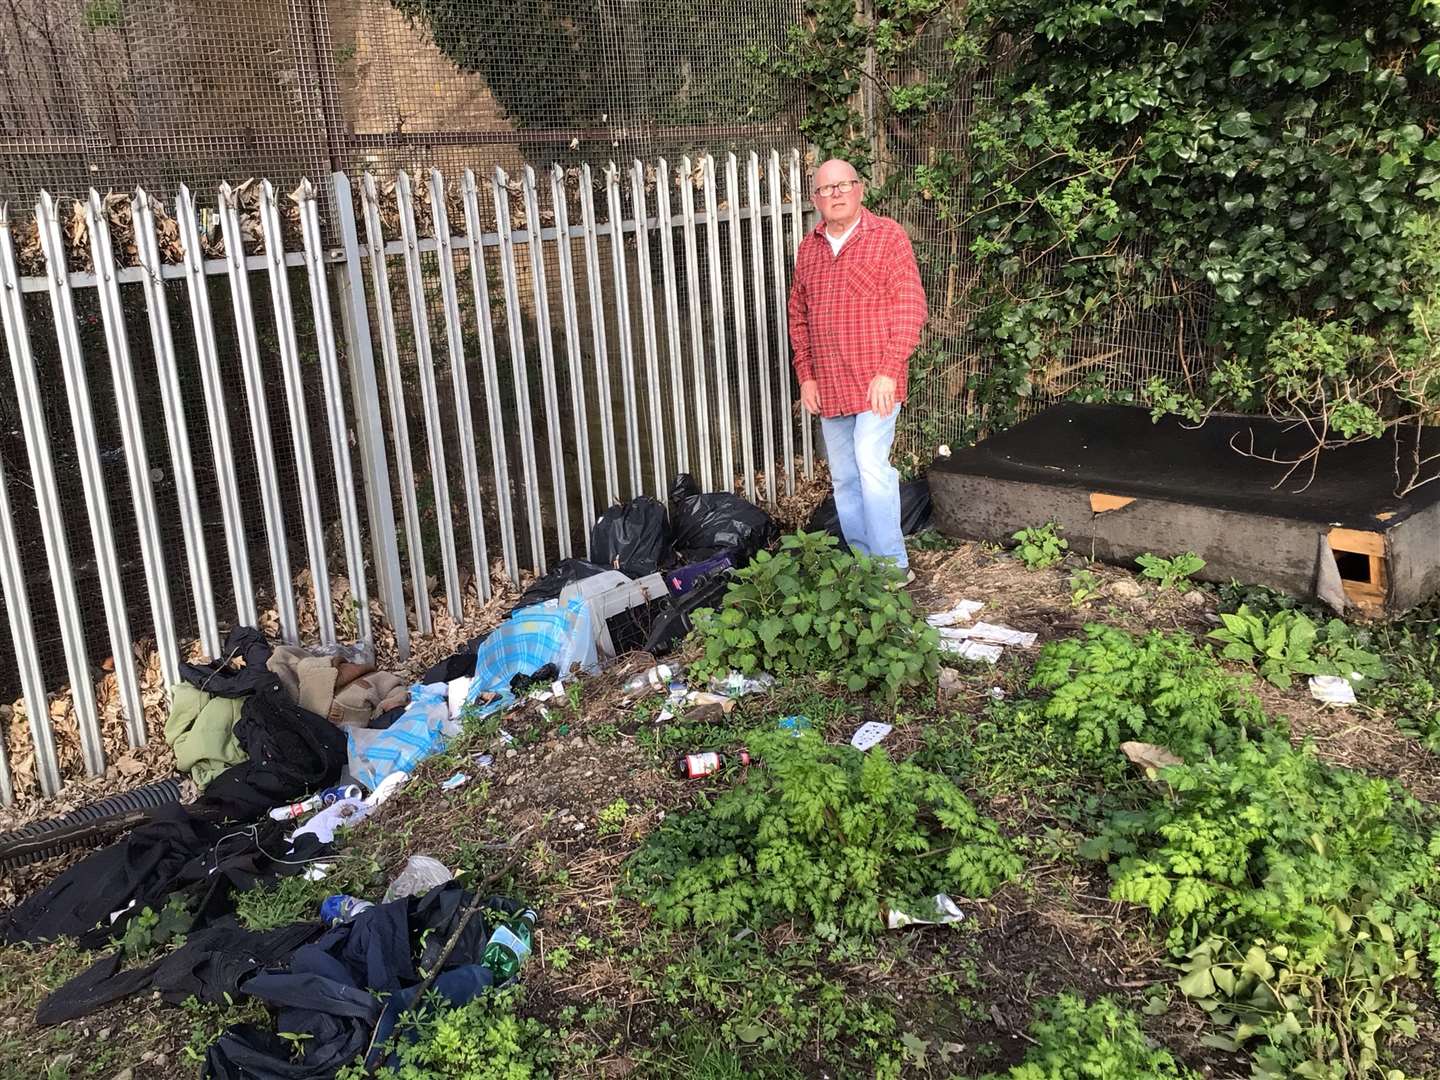 Bob Jackson, 76, from Strood, is fed up of cleaning up the area. Picture: Bob Jackson